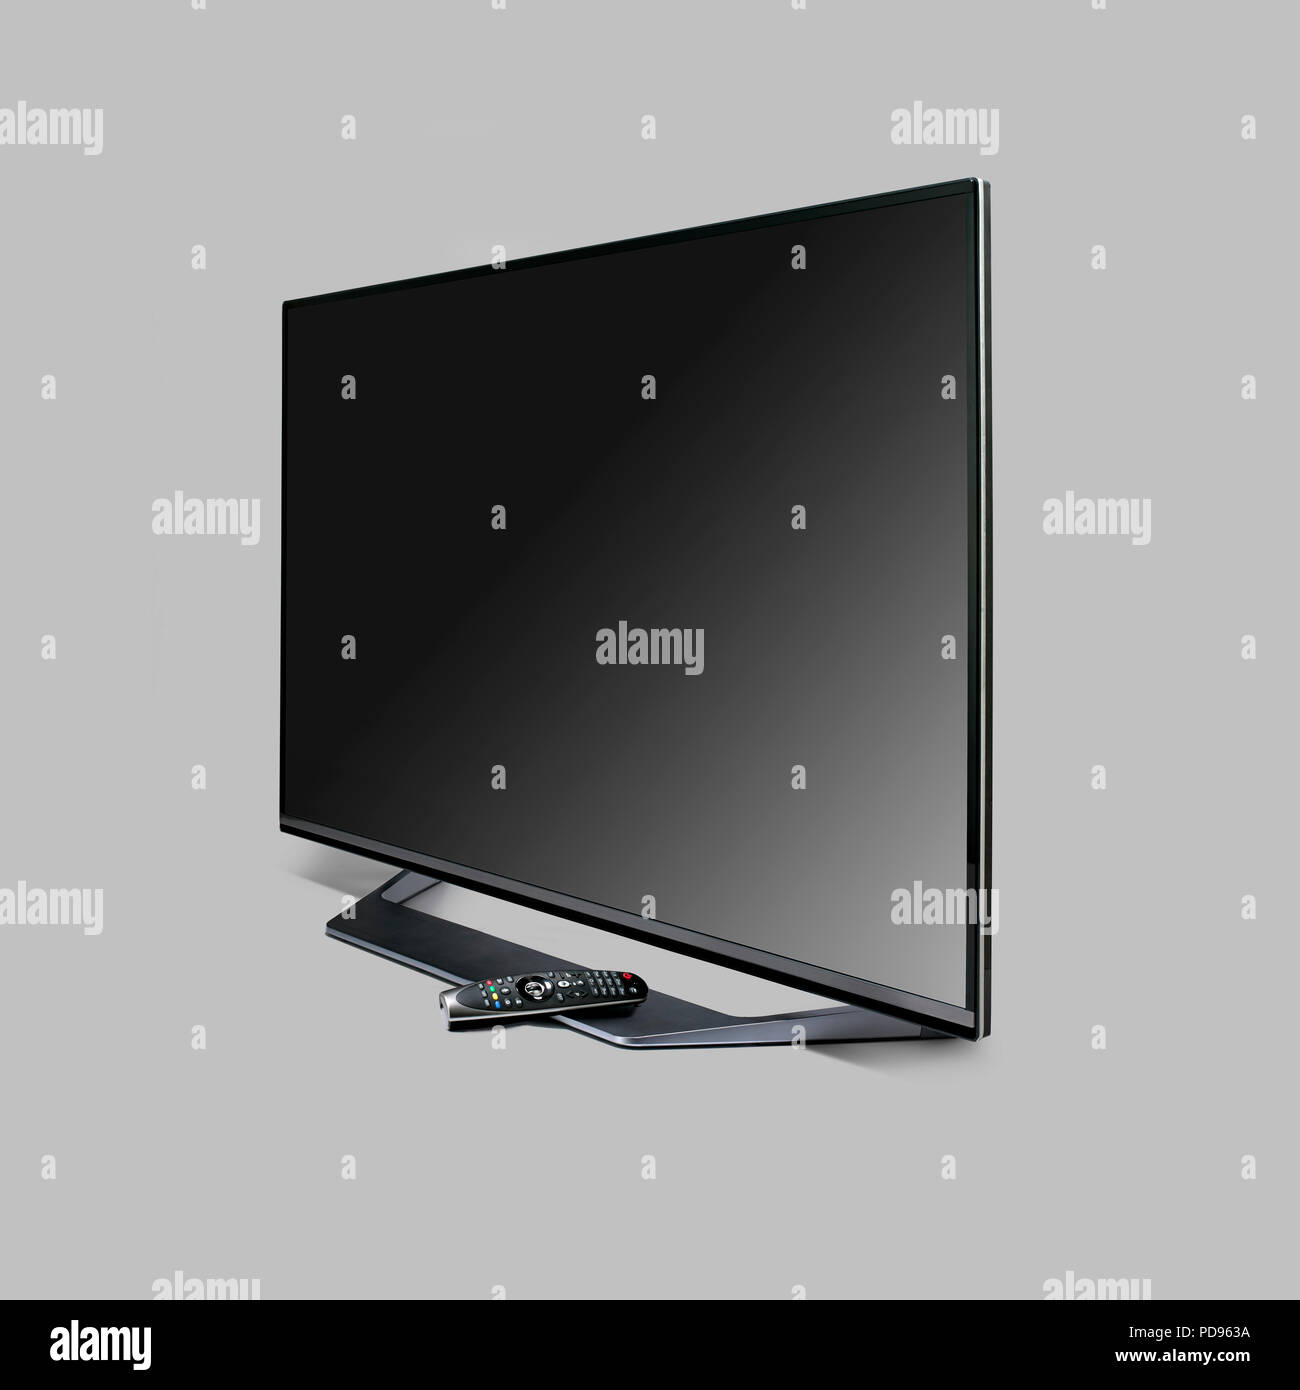 Large flat screen led television on a grey background Stock Photo